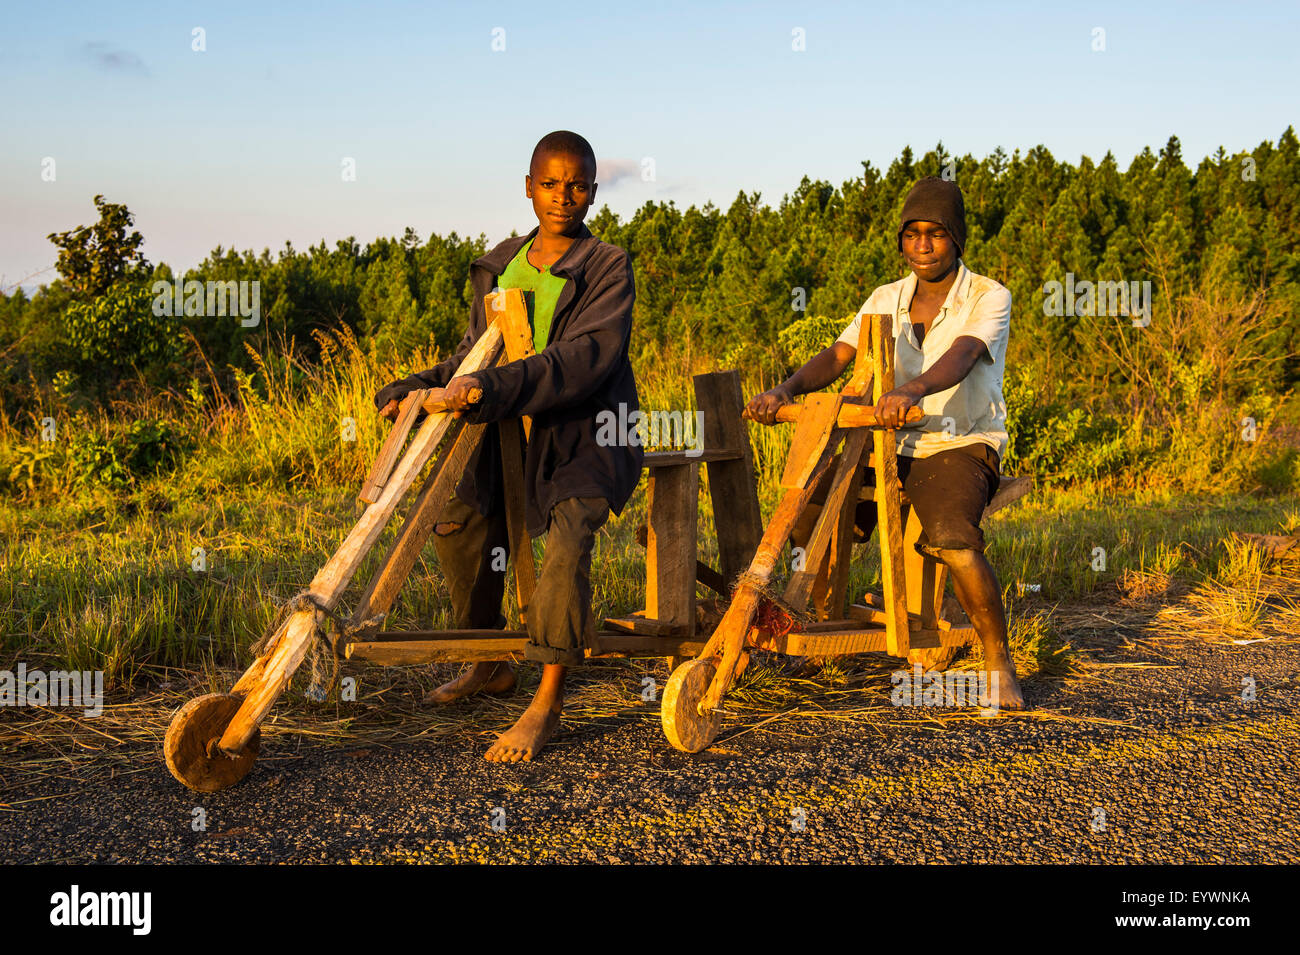 Local boys on their self-made bicycles, Malawi, Africa Stock Photo